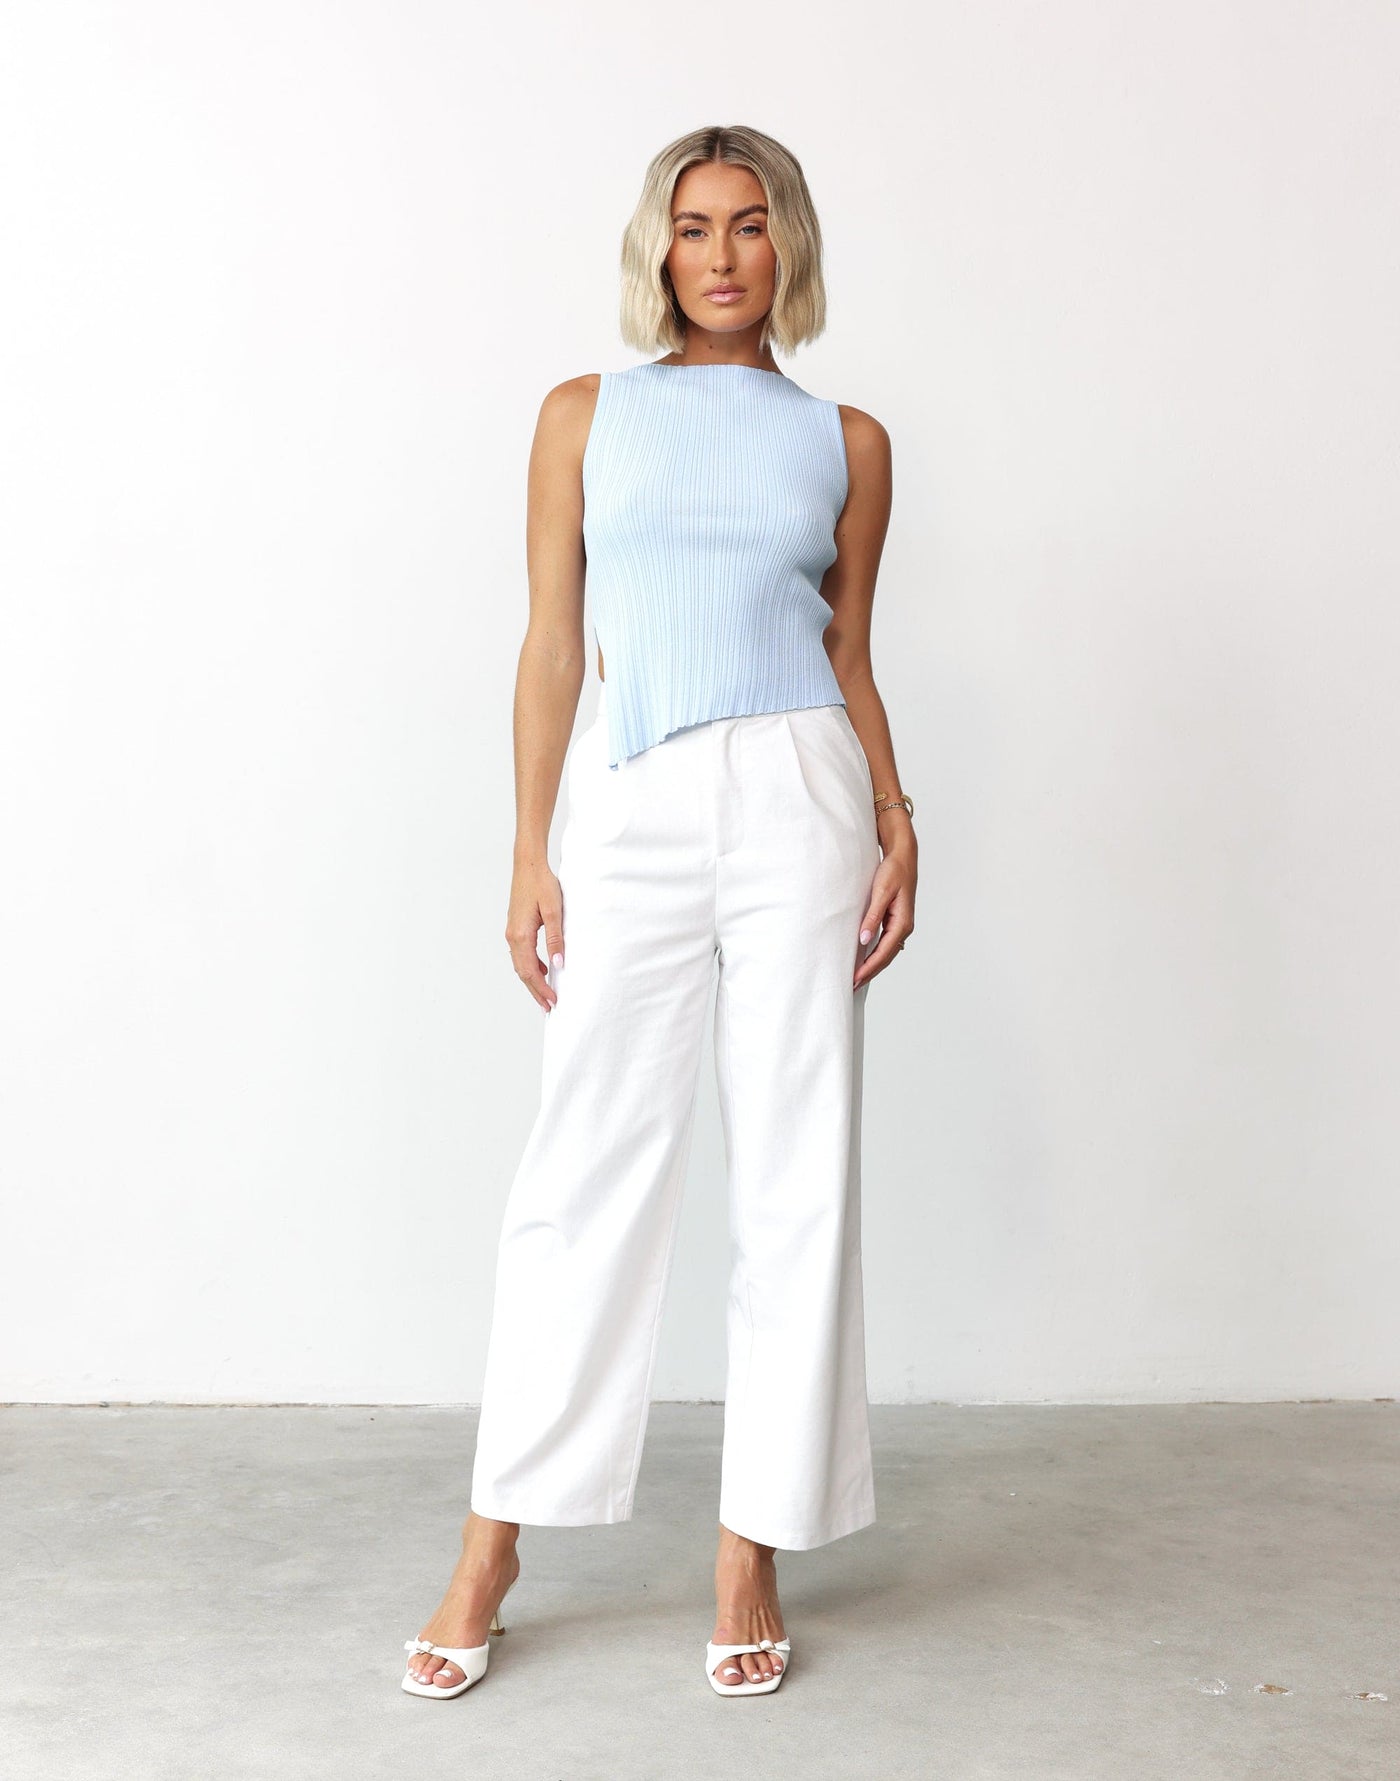 Kristella Pants (White) - High Waisted Linen Look Lined Pants - Women's Pants - Charcoal Clothing